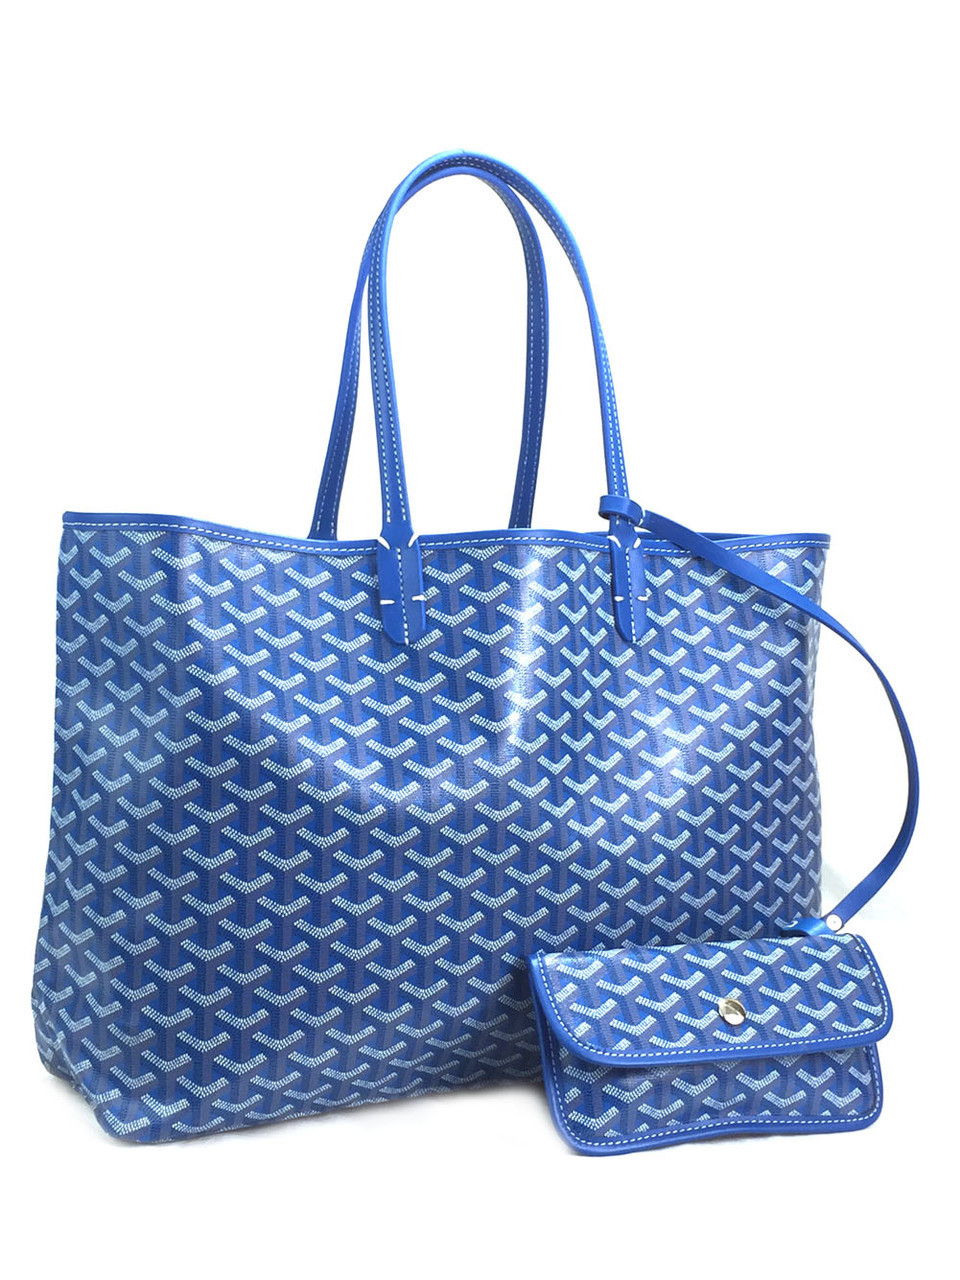 This is the cult-favorite Goyard Chevron Tote in the stunning special  color, Sky Blue. This light blue is so versatile and for sure to…